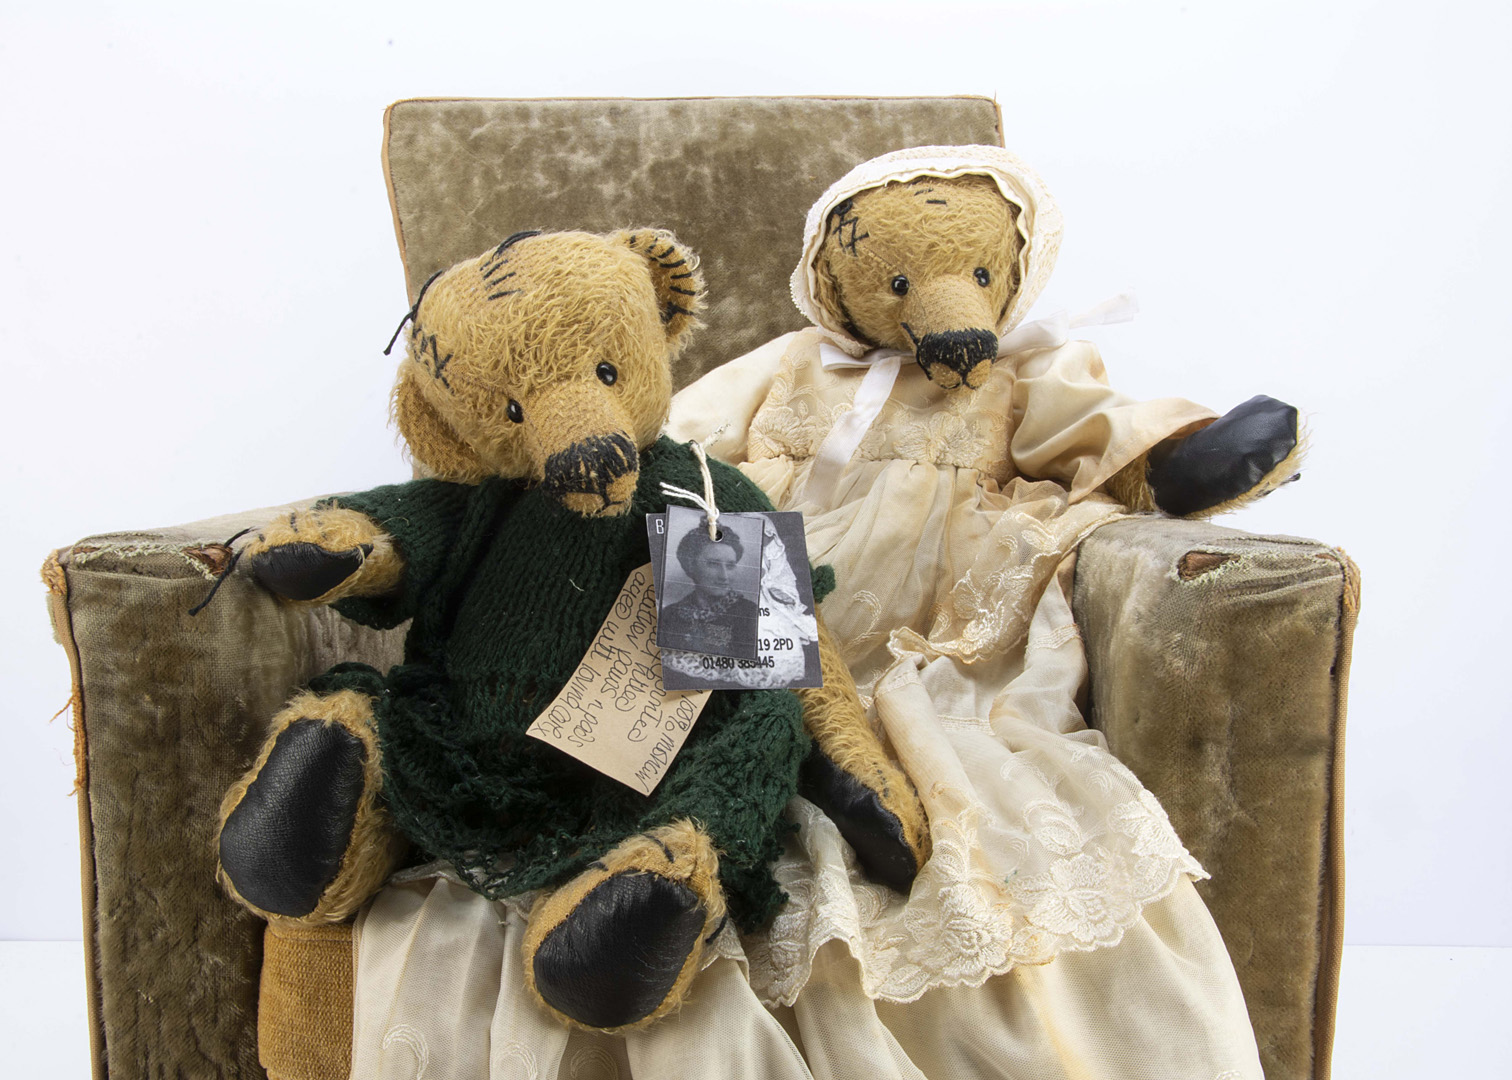 A Bears of Grace Nacy artist teddy bear from the Out of the Attic Christening Collection, with